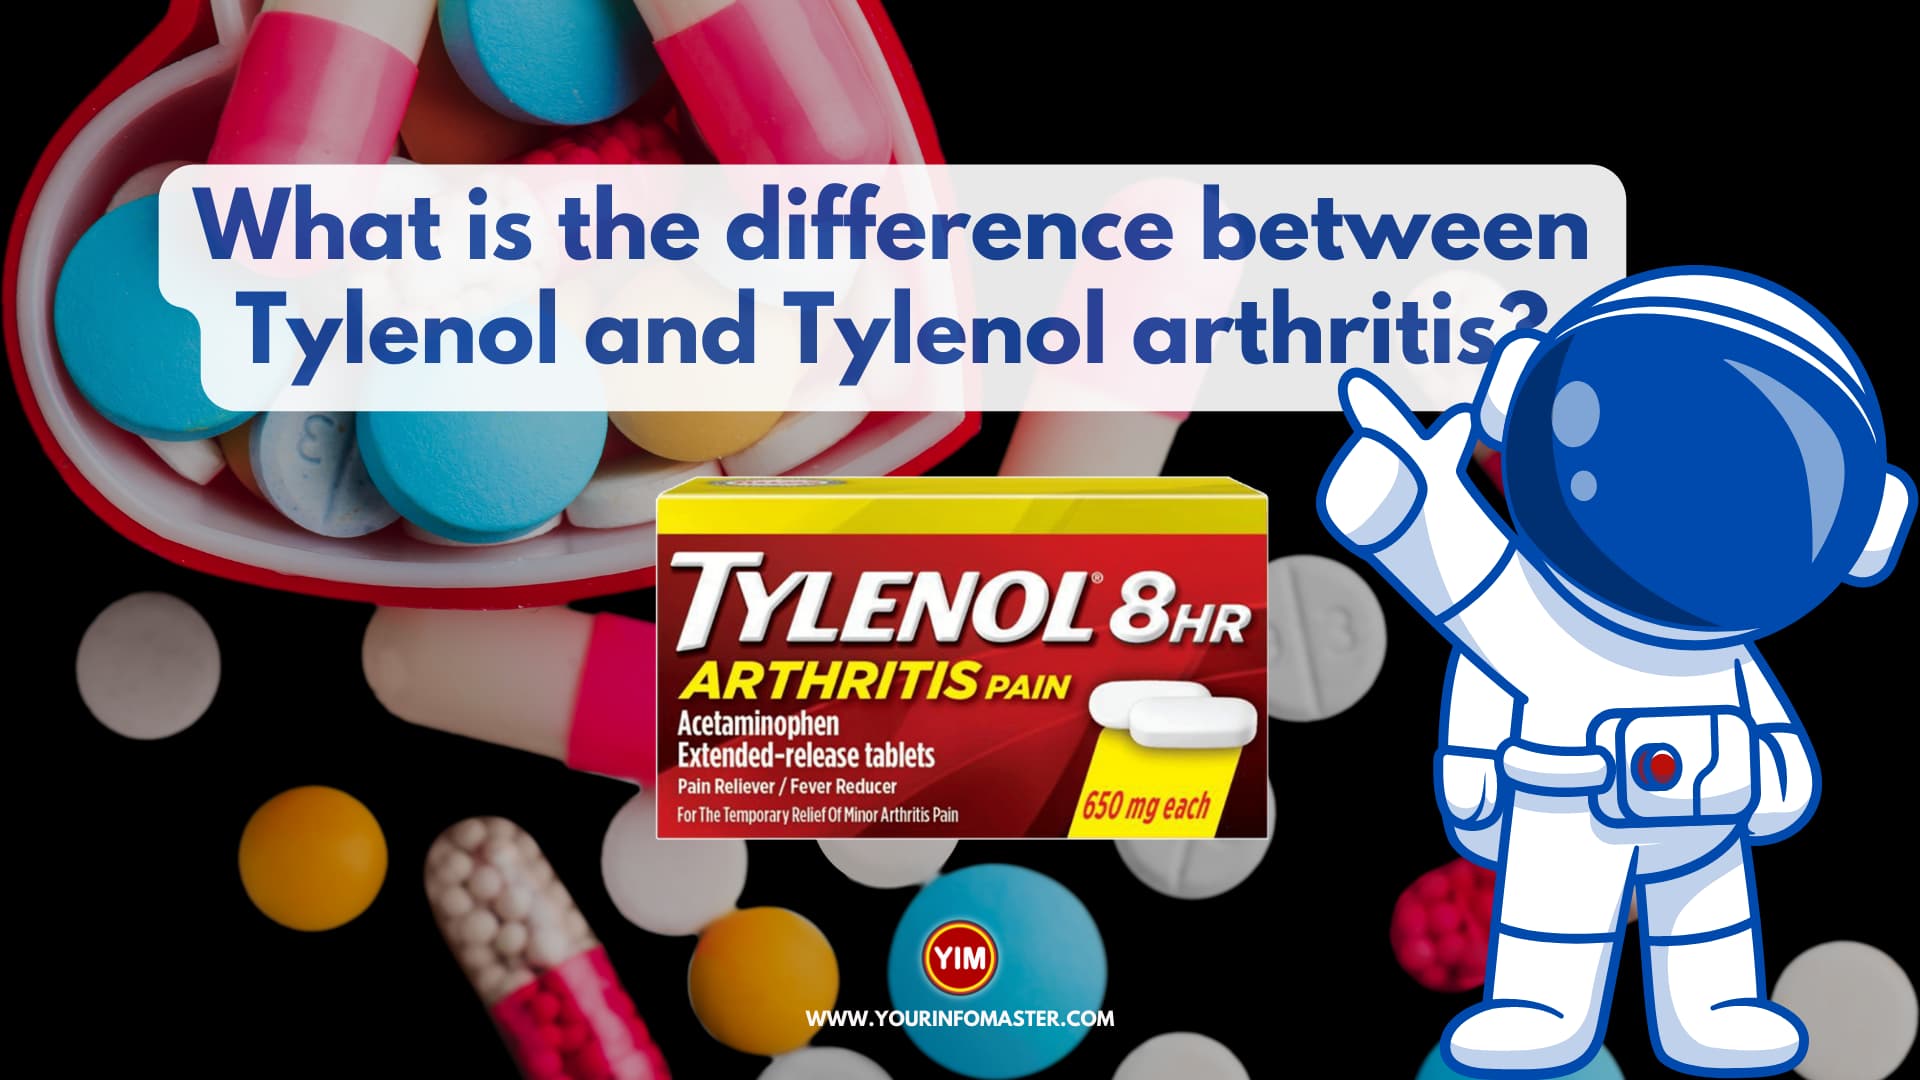 What is the difference between Tylenol and Tylenol arthritis